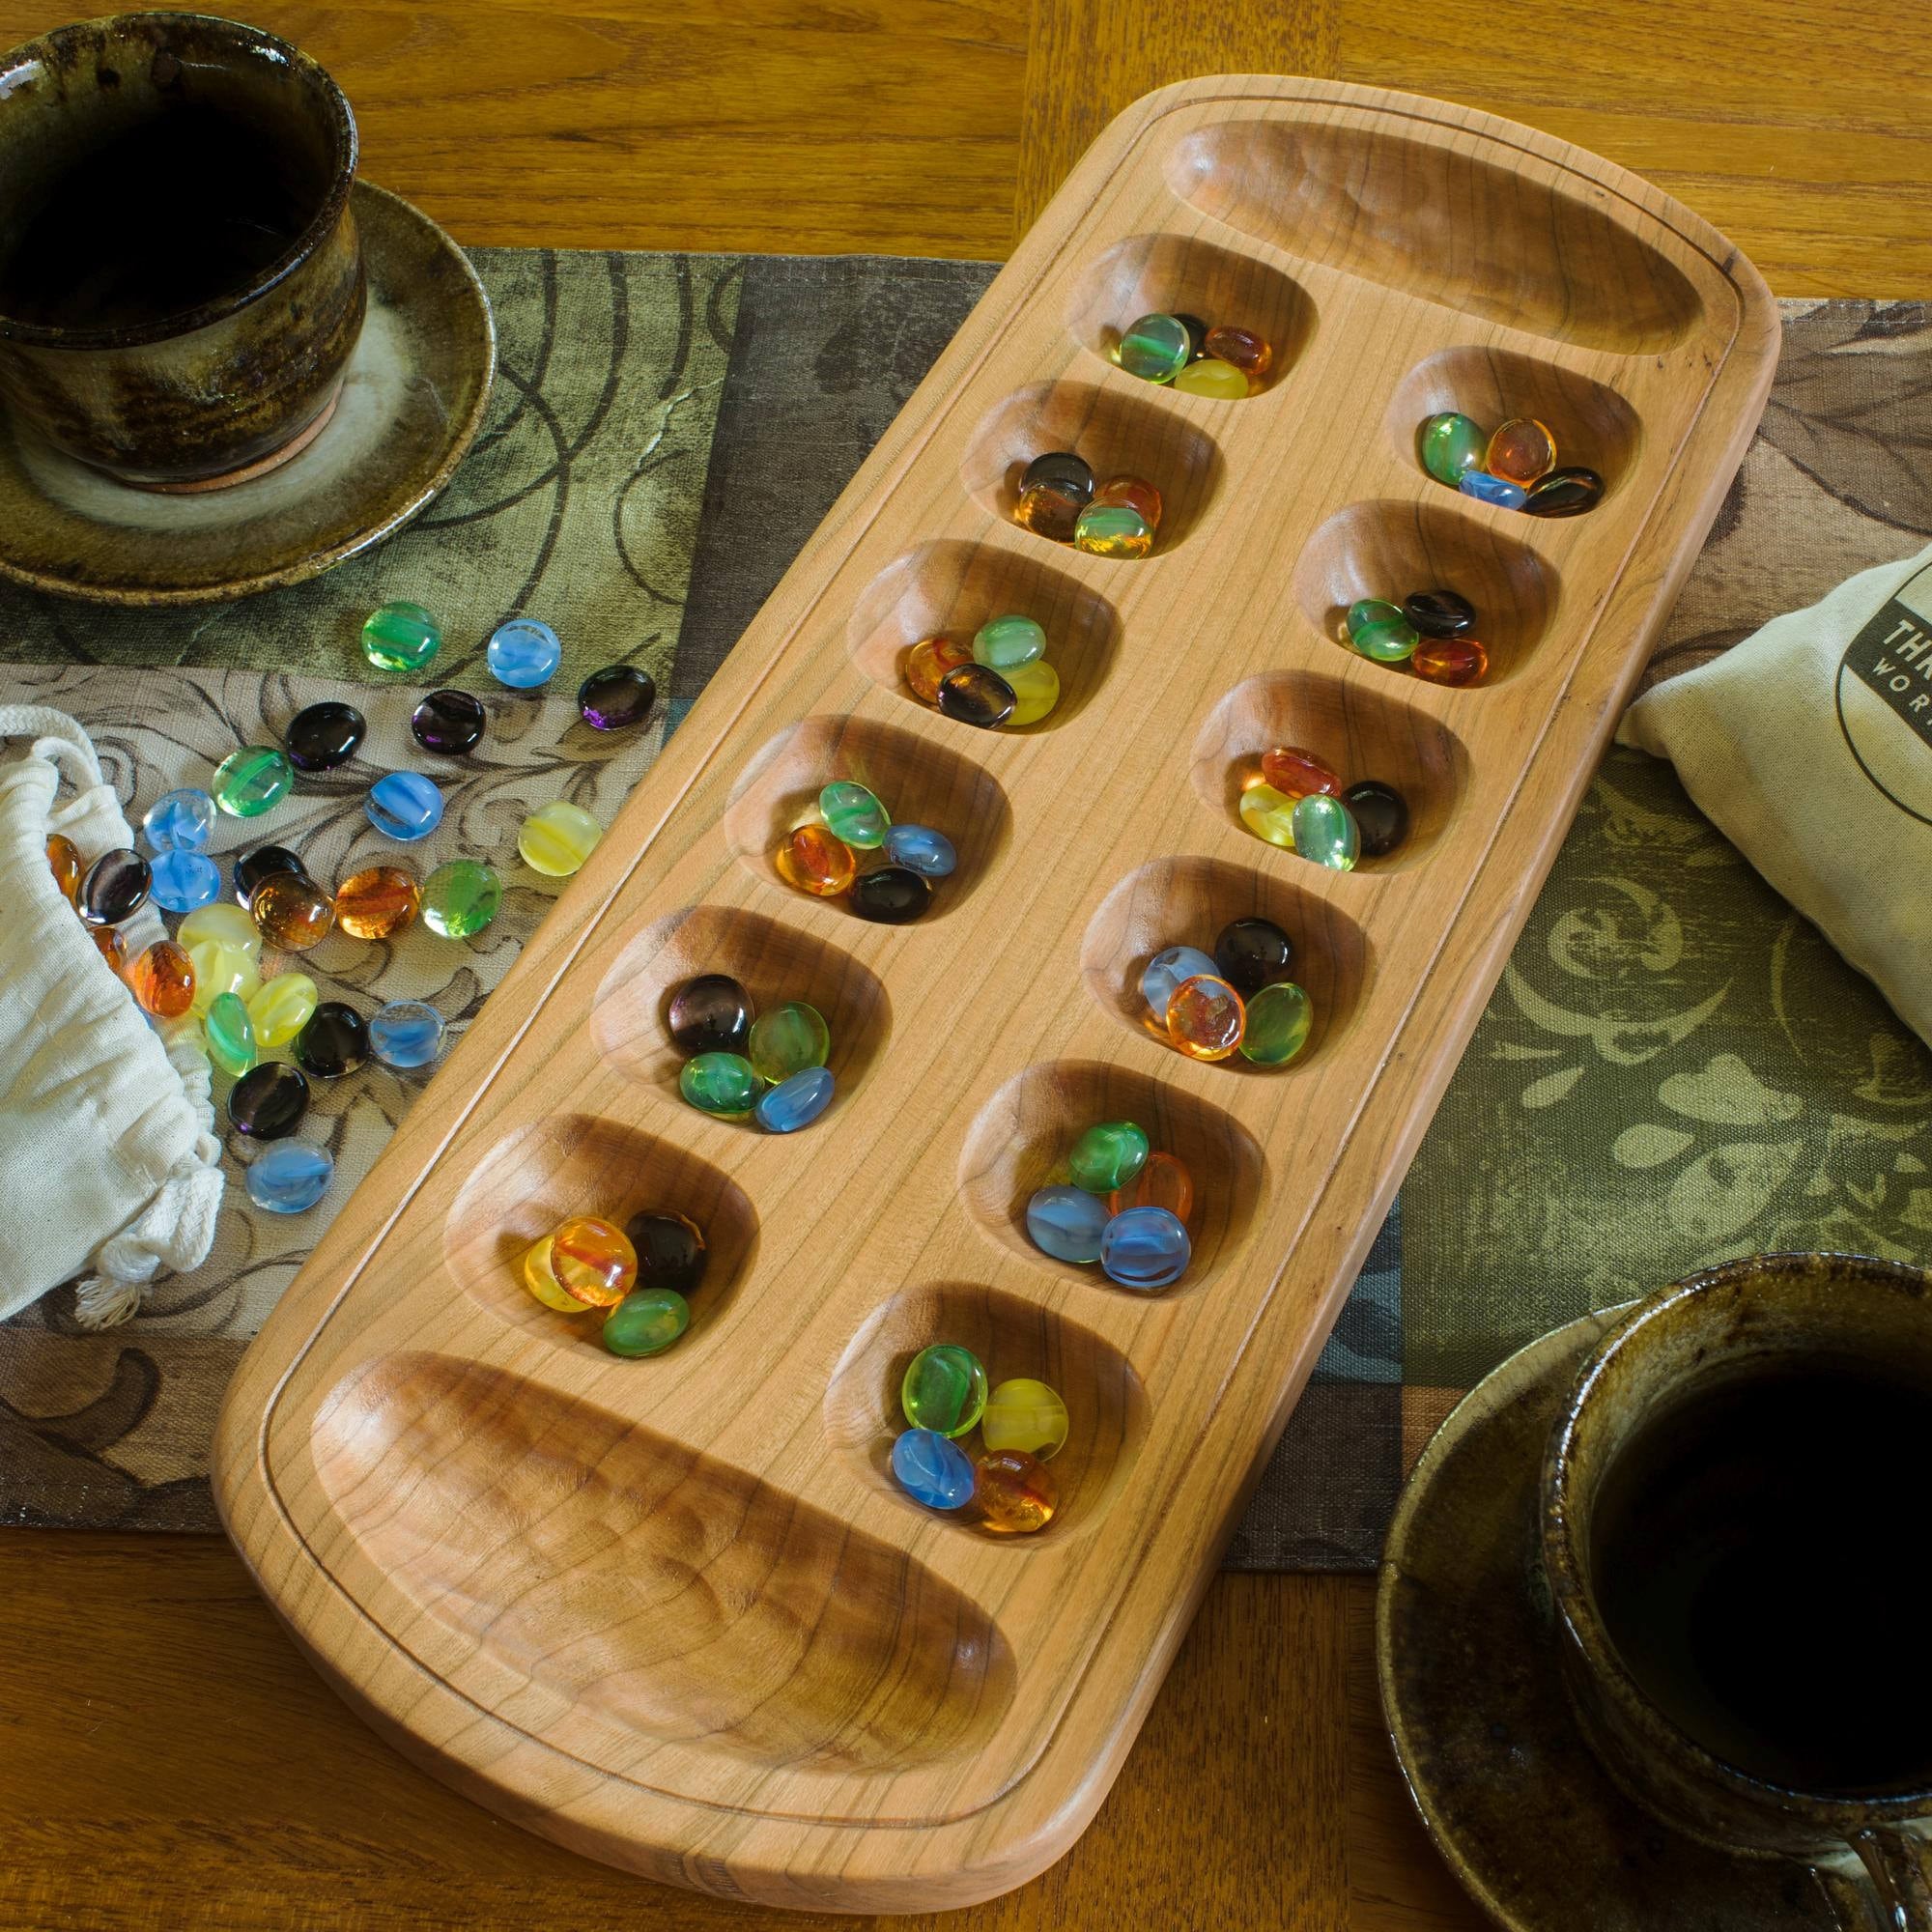 KINGOU Replacement Mancala Stones Mixed Colored Flat Glass  Pebbles/Beads/Gems for Games (½ 12-15mm)